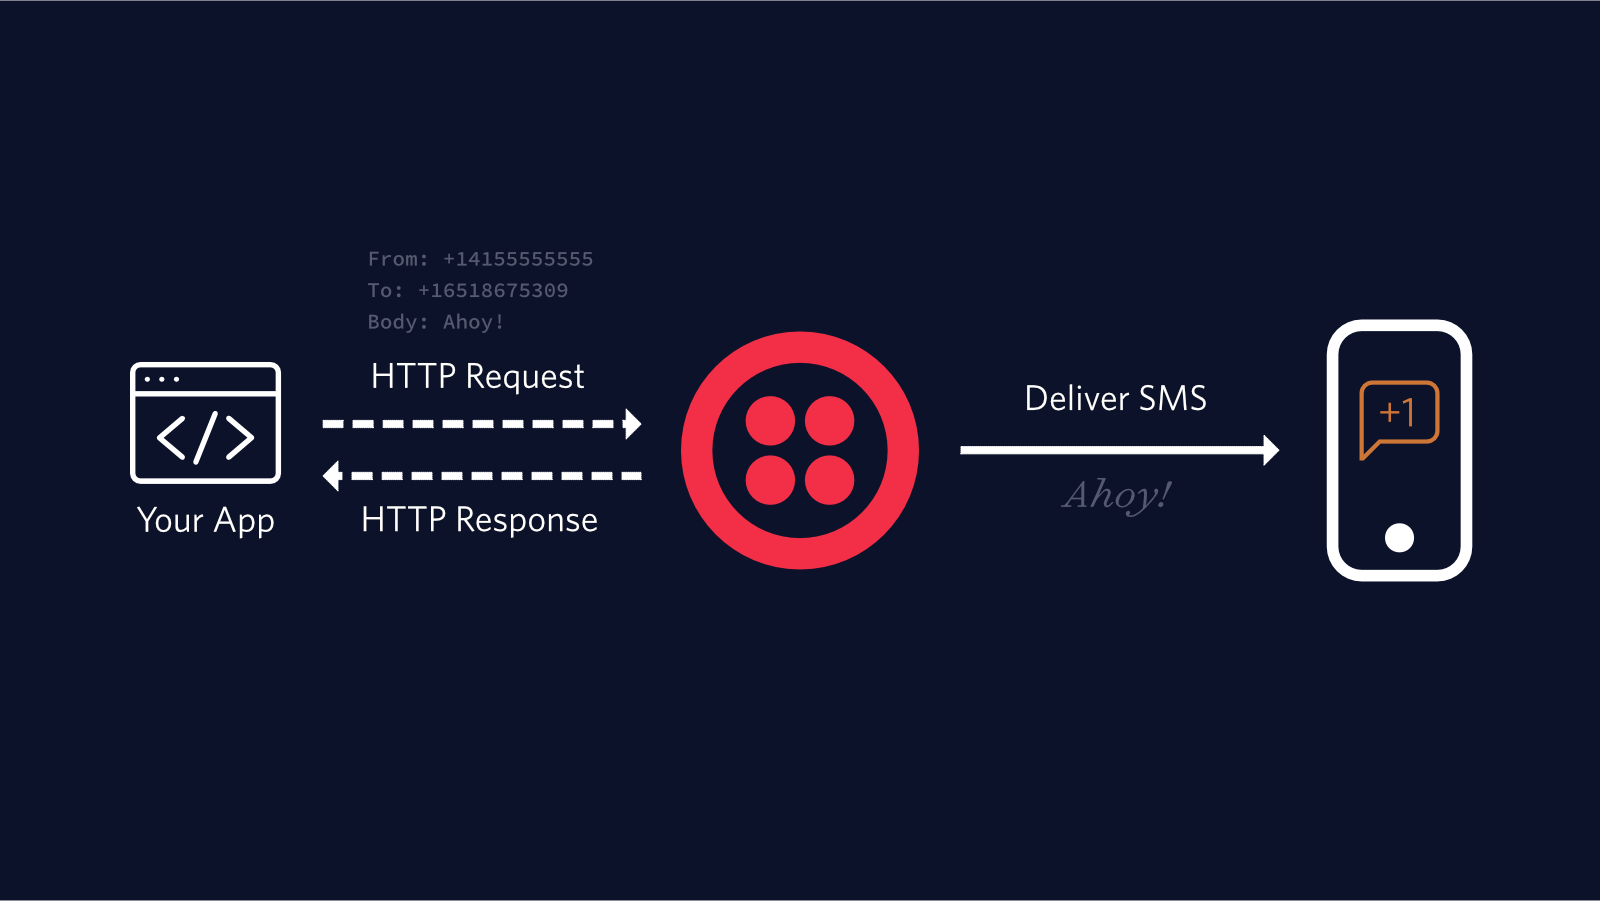 Sending a Text Message with the Twilio SMS API.